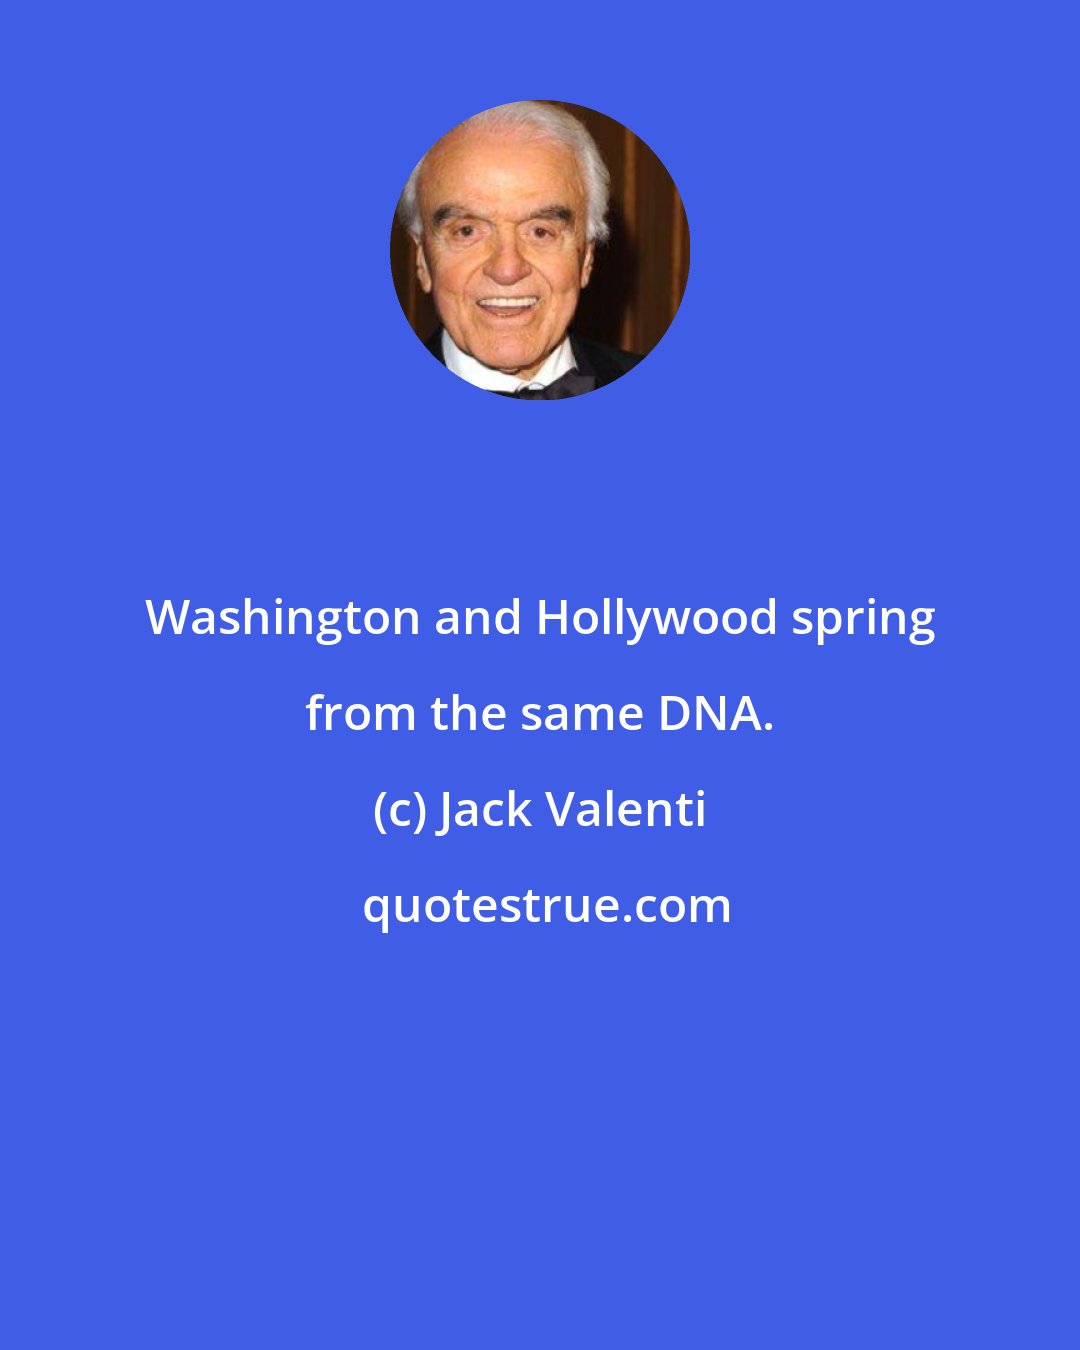 Jack Valenti: Washington and Hollywood spring from the same DNA.